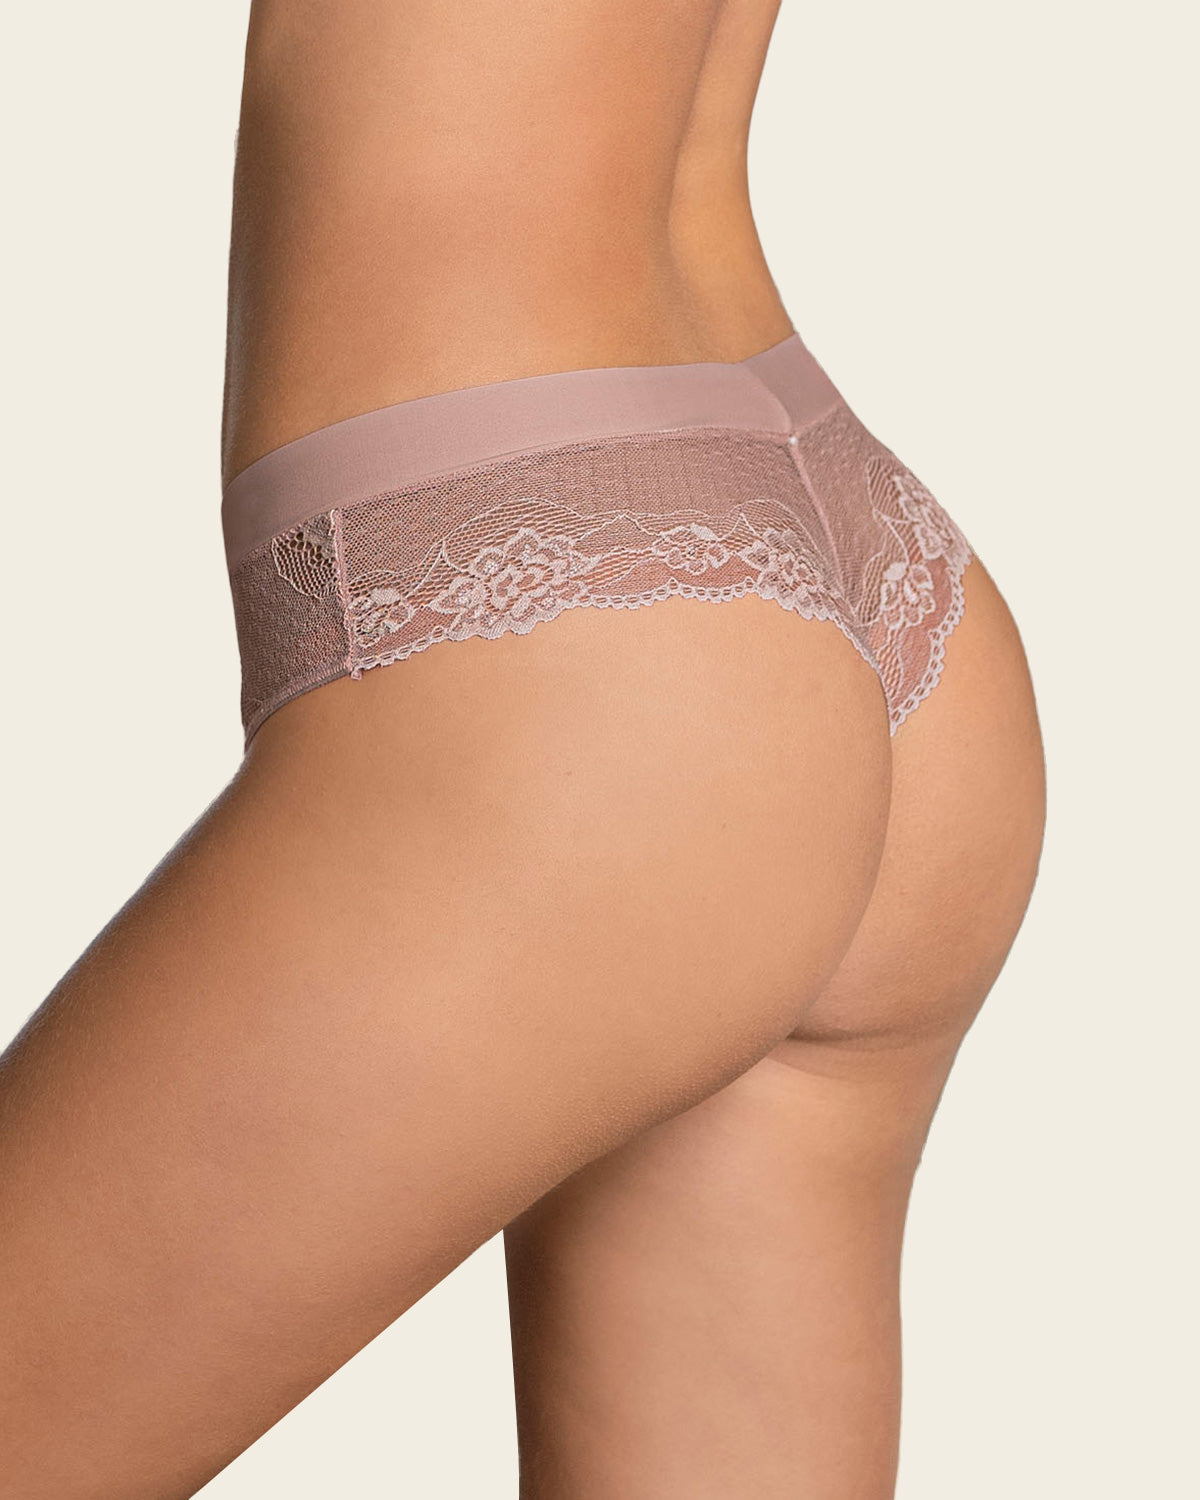 Intimissimi Lace Microfiber Cheeky Thong Panties in Dk.Grey Sz: L New w/Tags